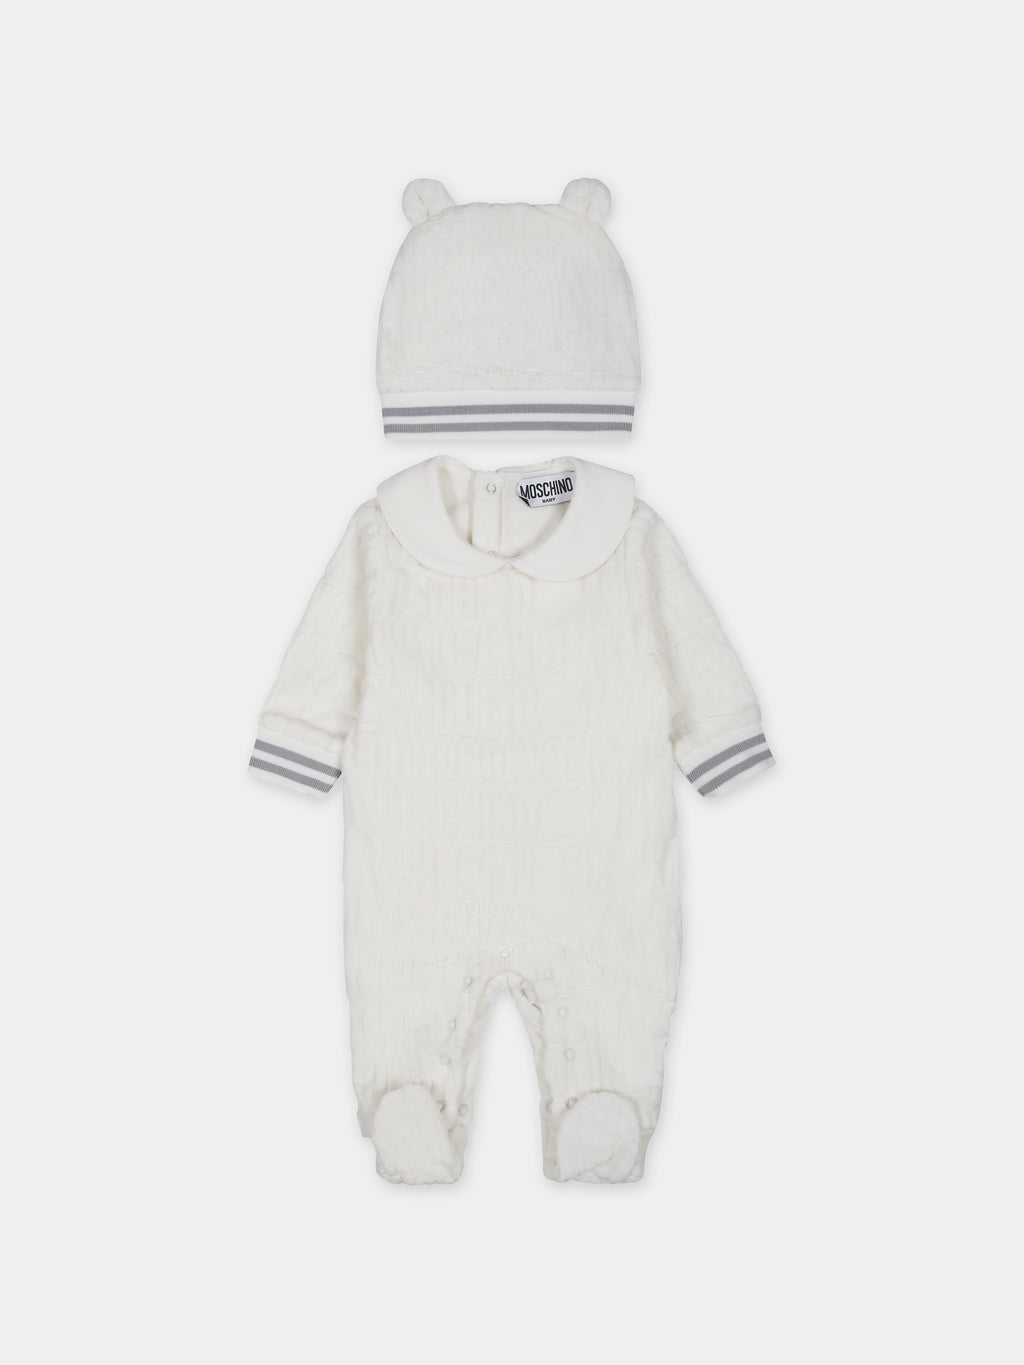 White suit for babykids with Teddy bear